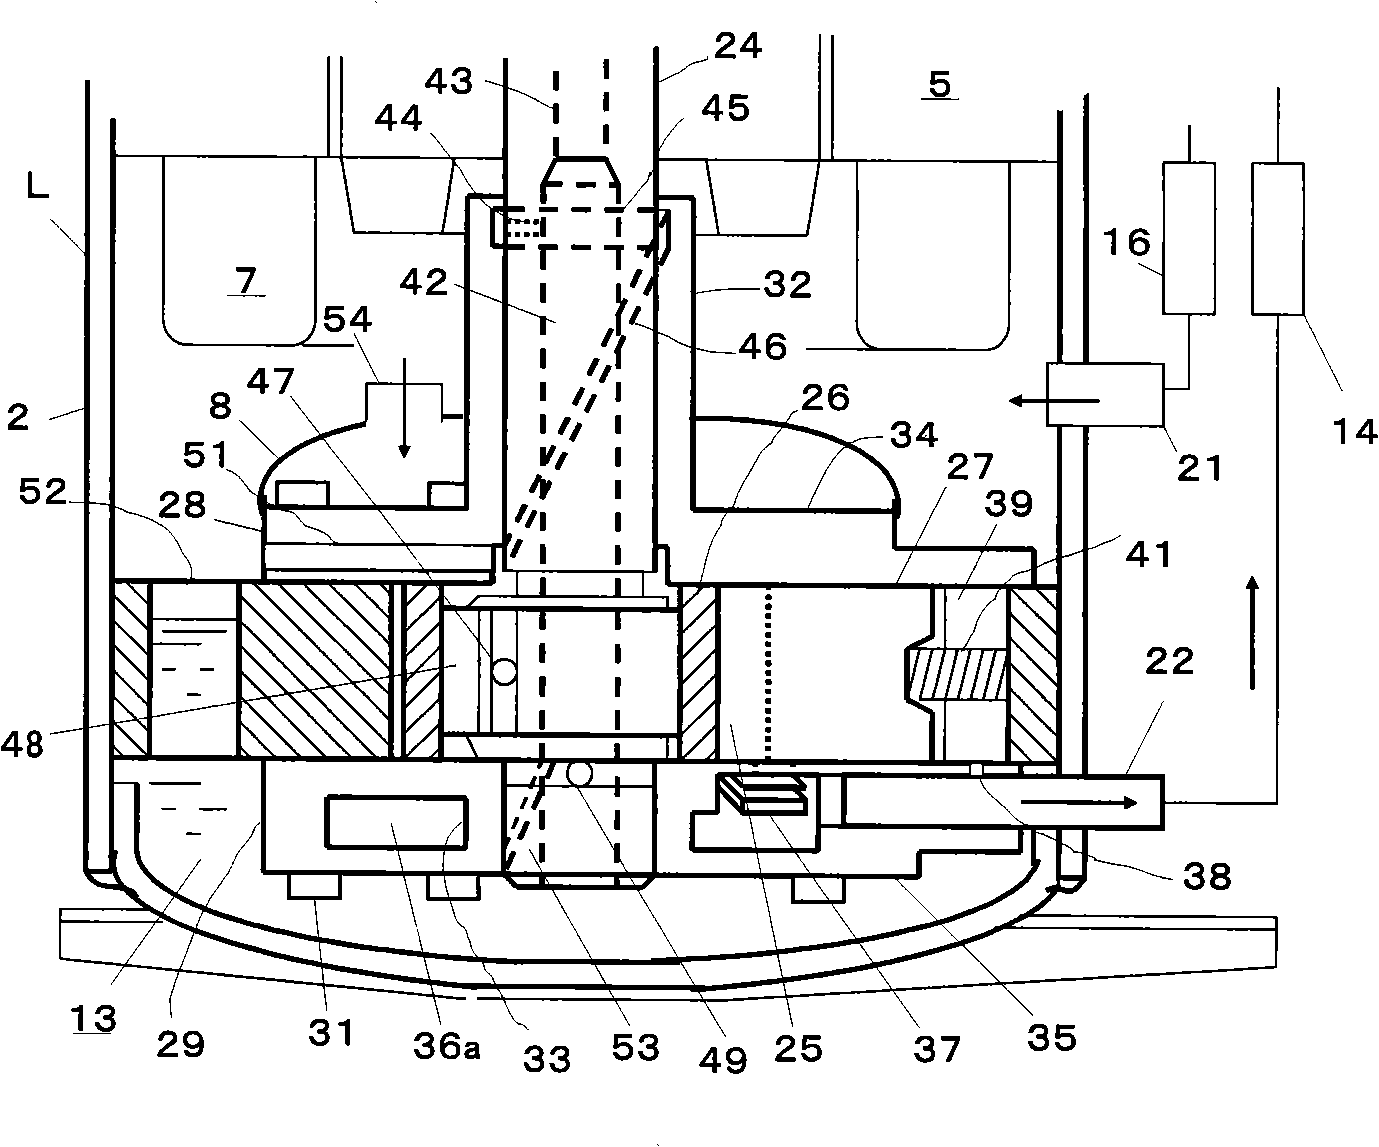 Control method for reducing oil-jetting apparatus of rotary compressor and uses thereof